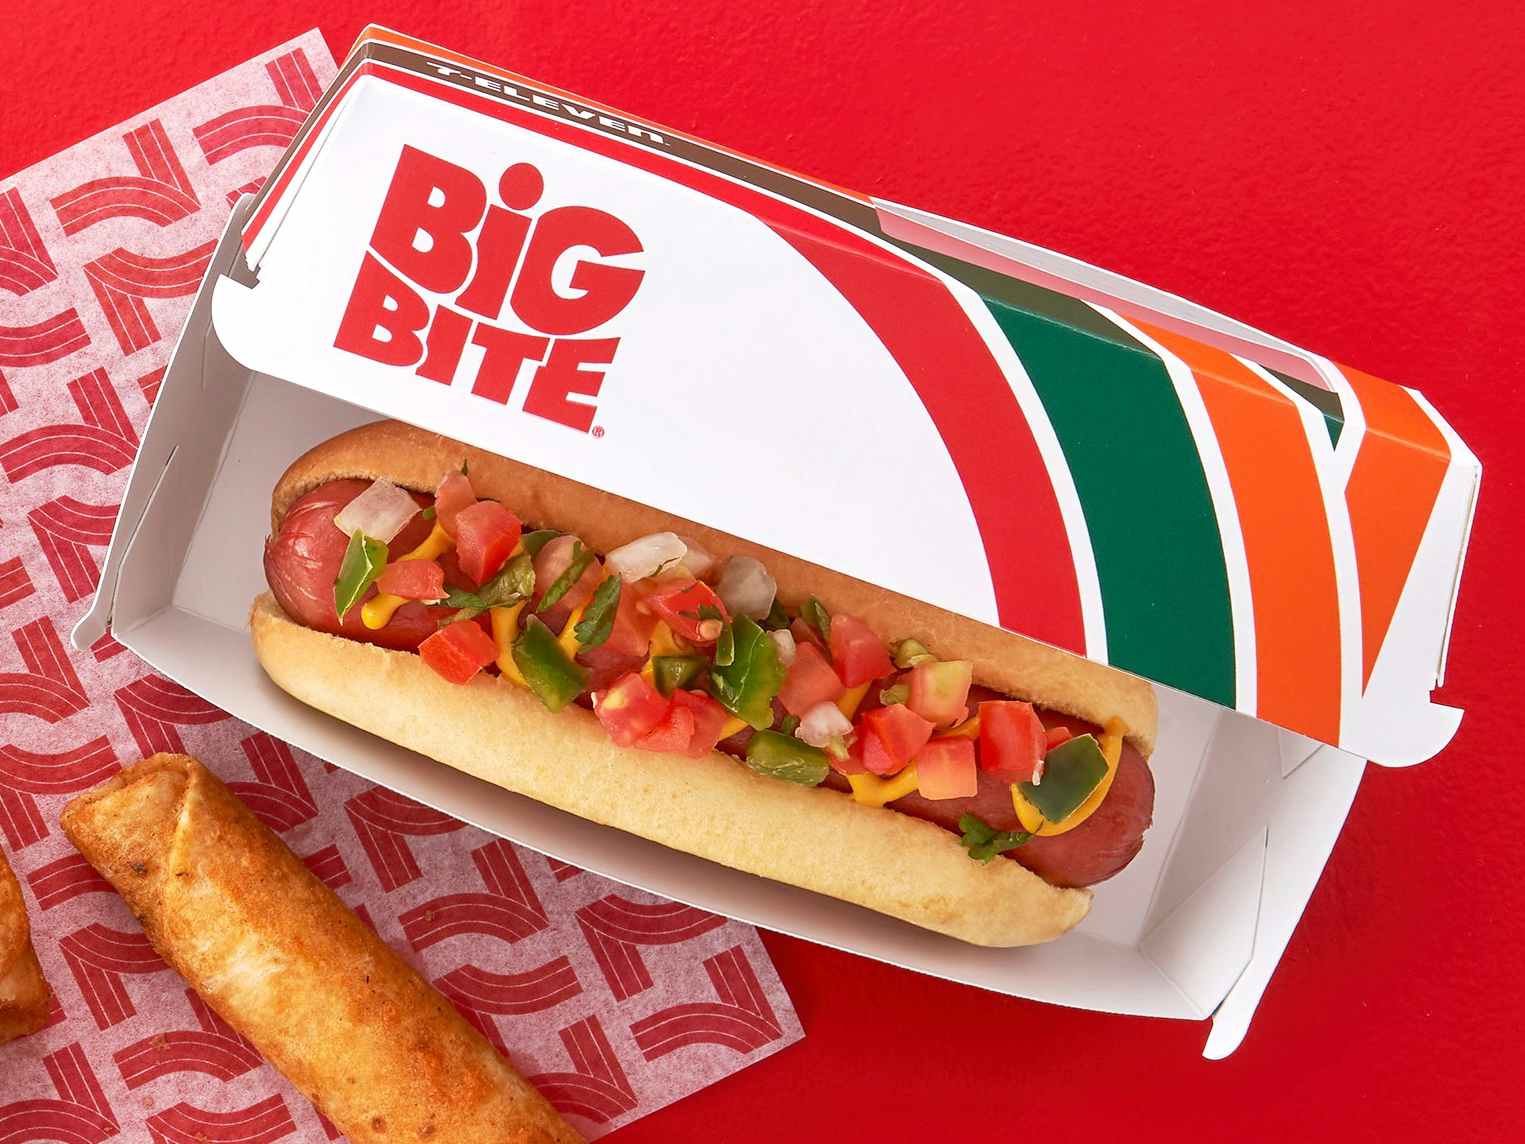 7-eleven big bite hot dog with toppings